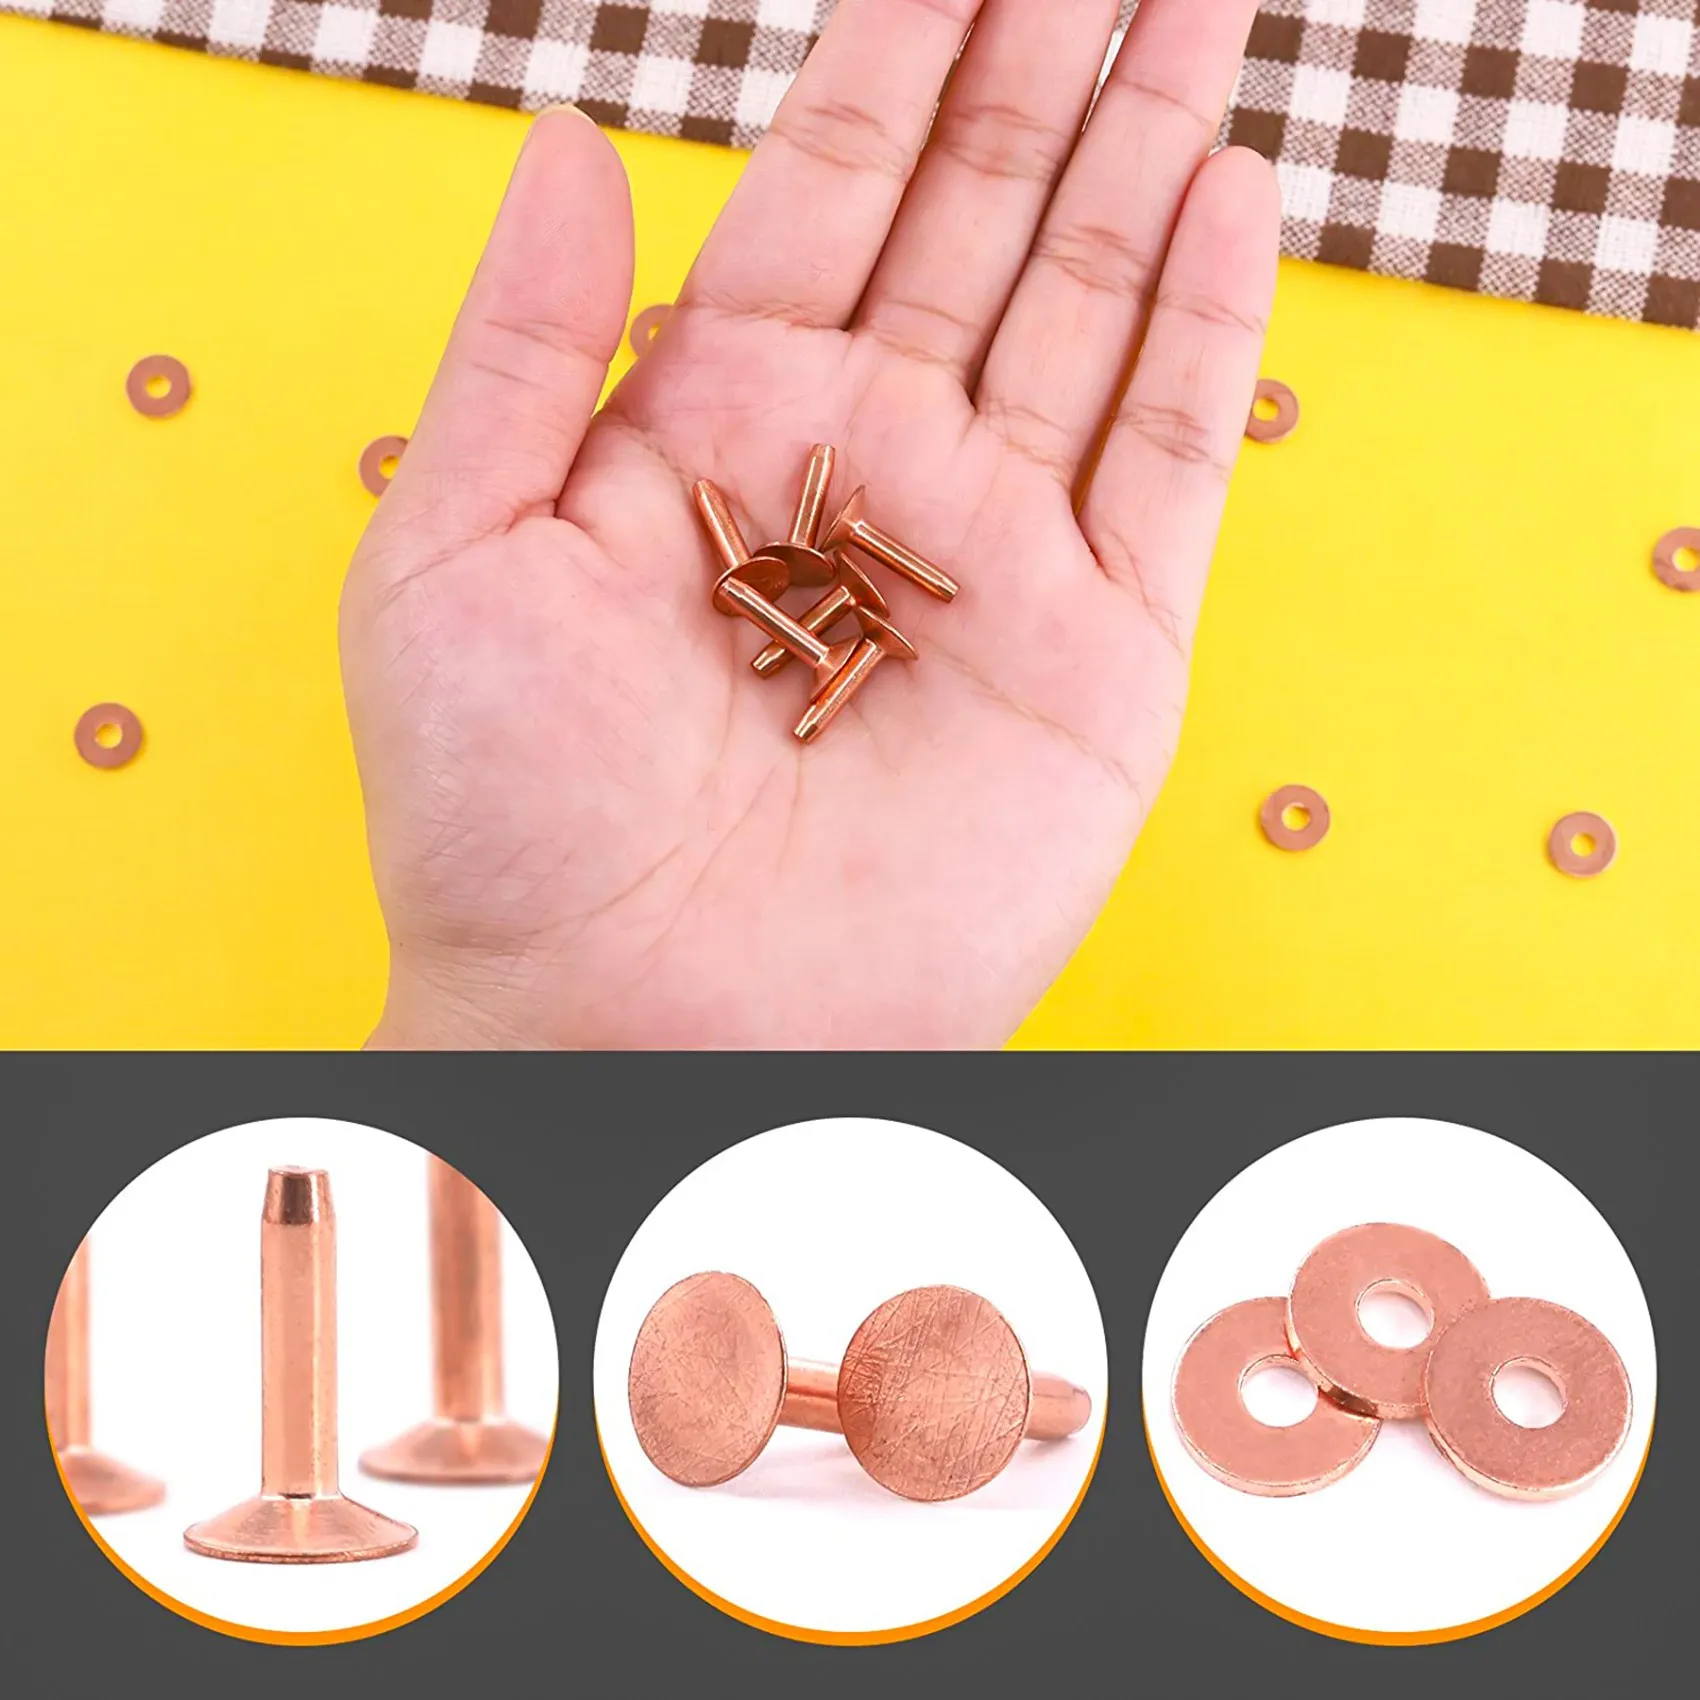 

100 Sets Copper Rivets and Burrs Washers Leather Copper Rivet Fastener for Wallets Collars Leather DIY Craft Supplies